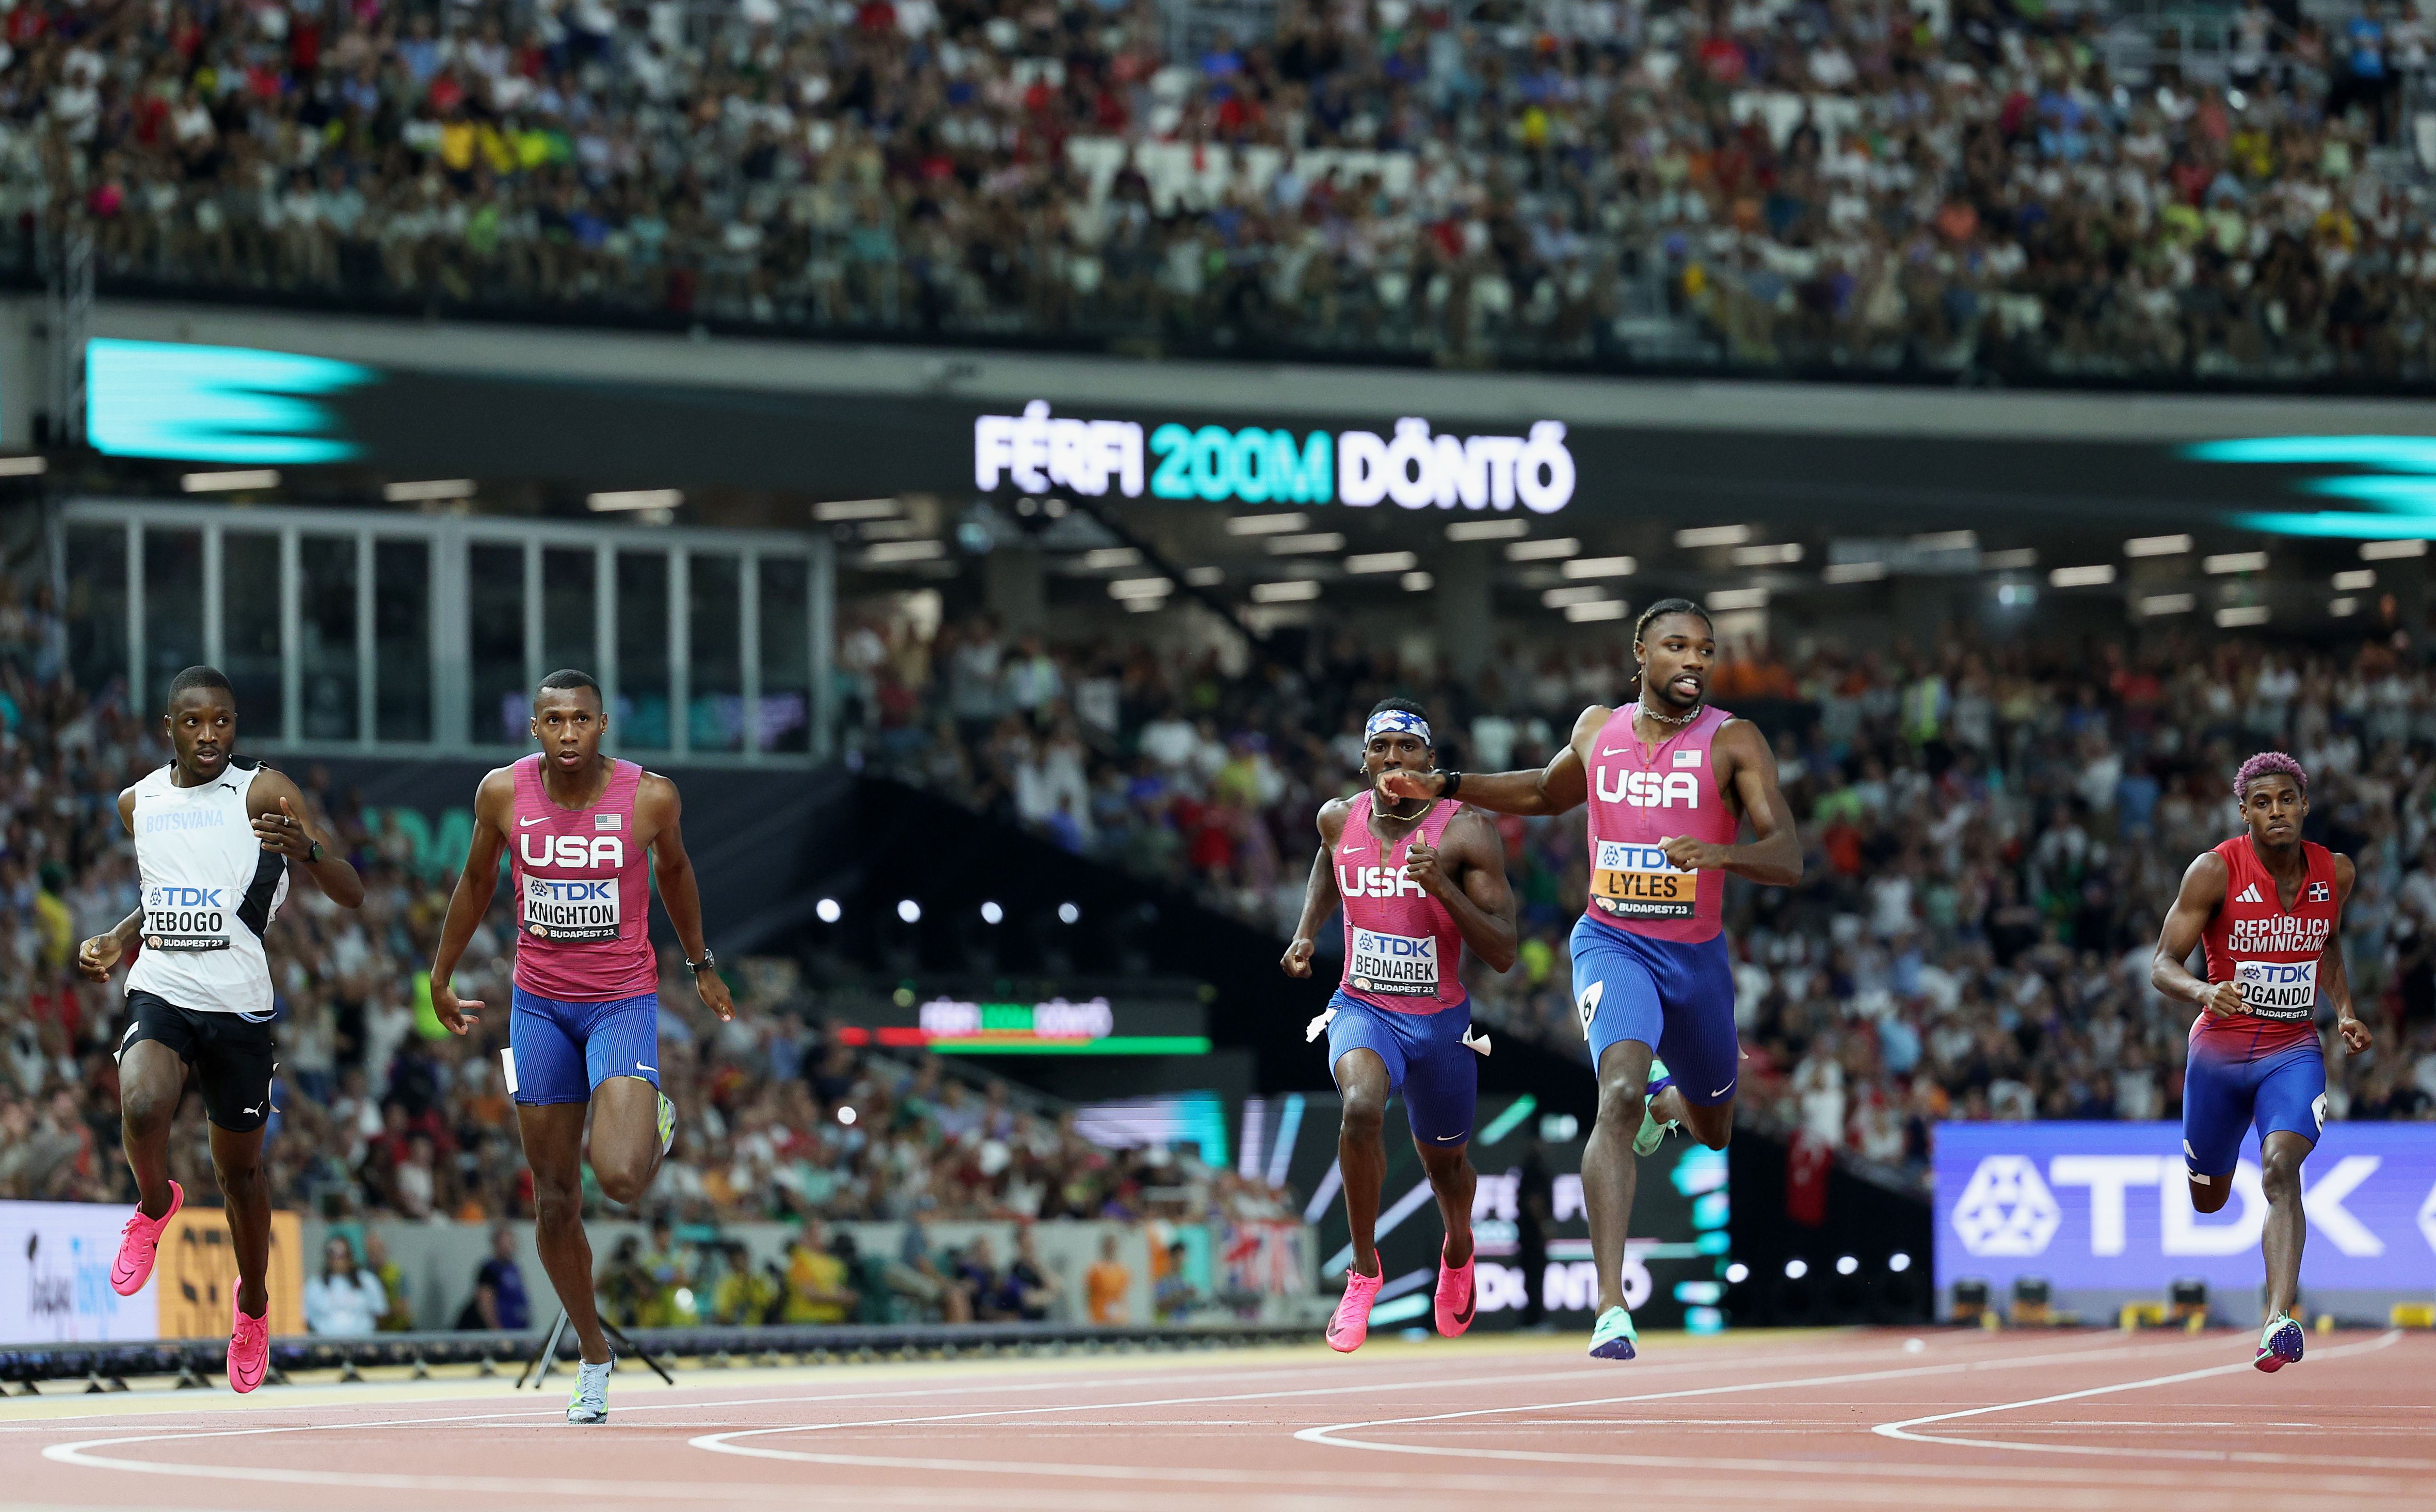 Noah Lyles wins the 200m at the World Athletics Championships Budapest 23